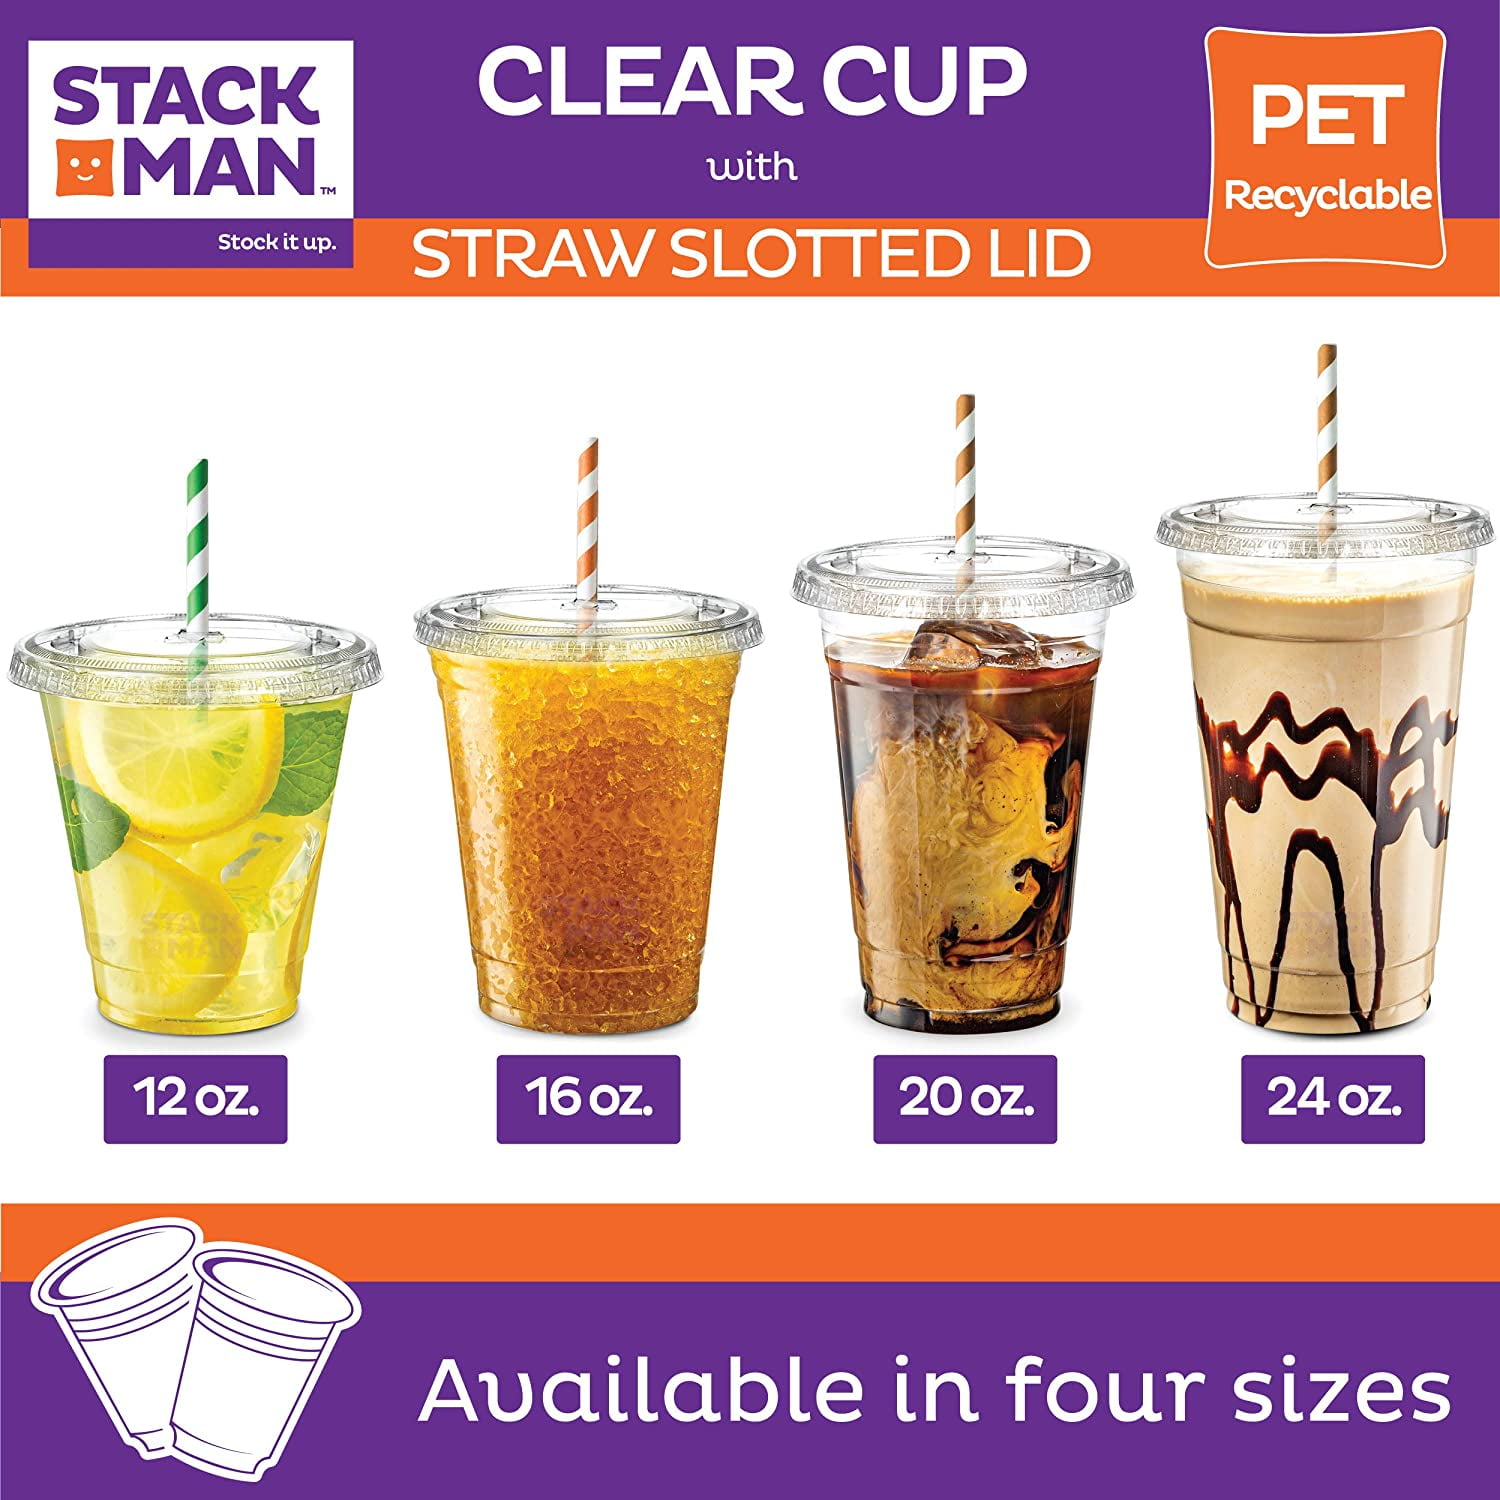 Decony 100 Pc. Clear Plastic Cups with Lids and Straws- 16 Oz Plastic Cups  with Lids Suitable for Ic…See more Decony 100 Pc. Clear Plastic Cups with